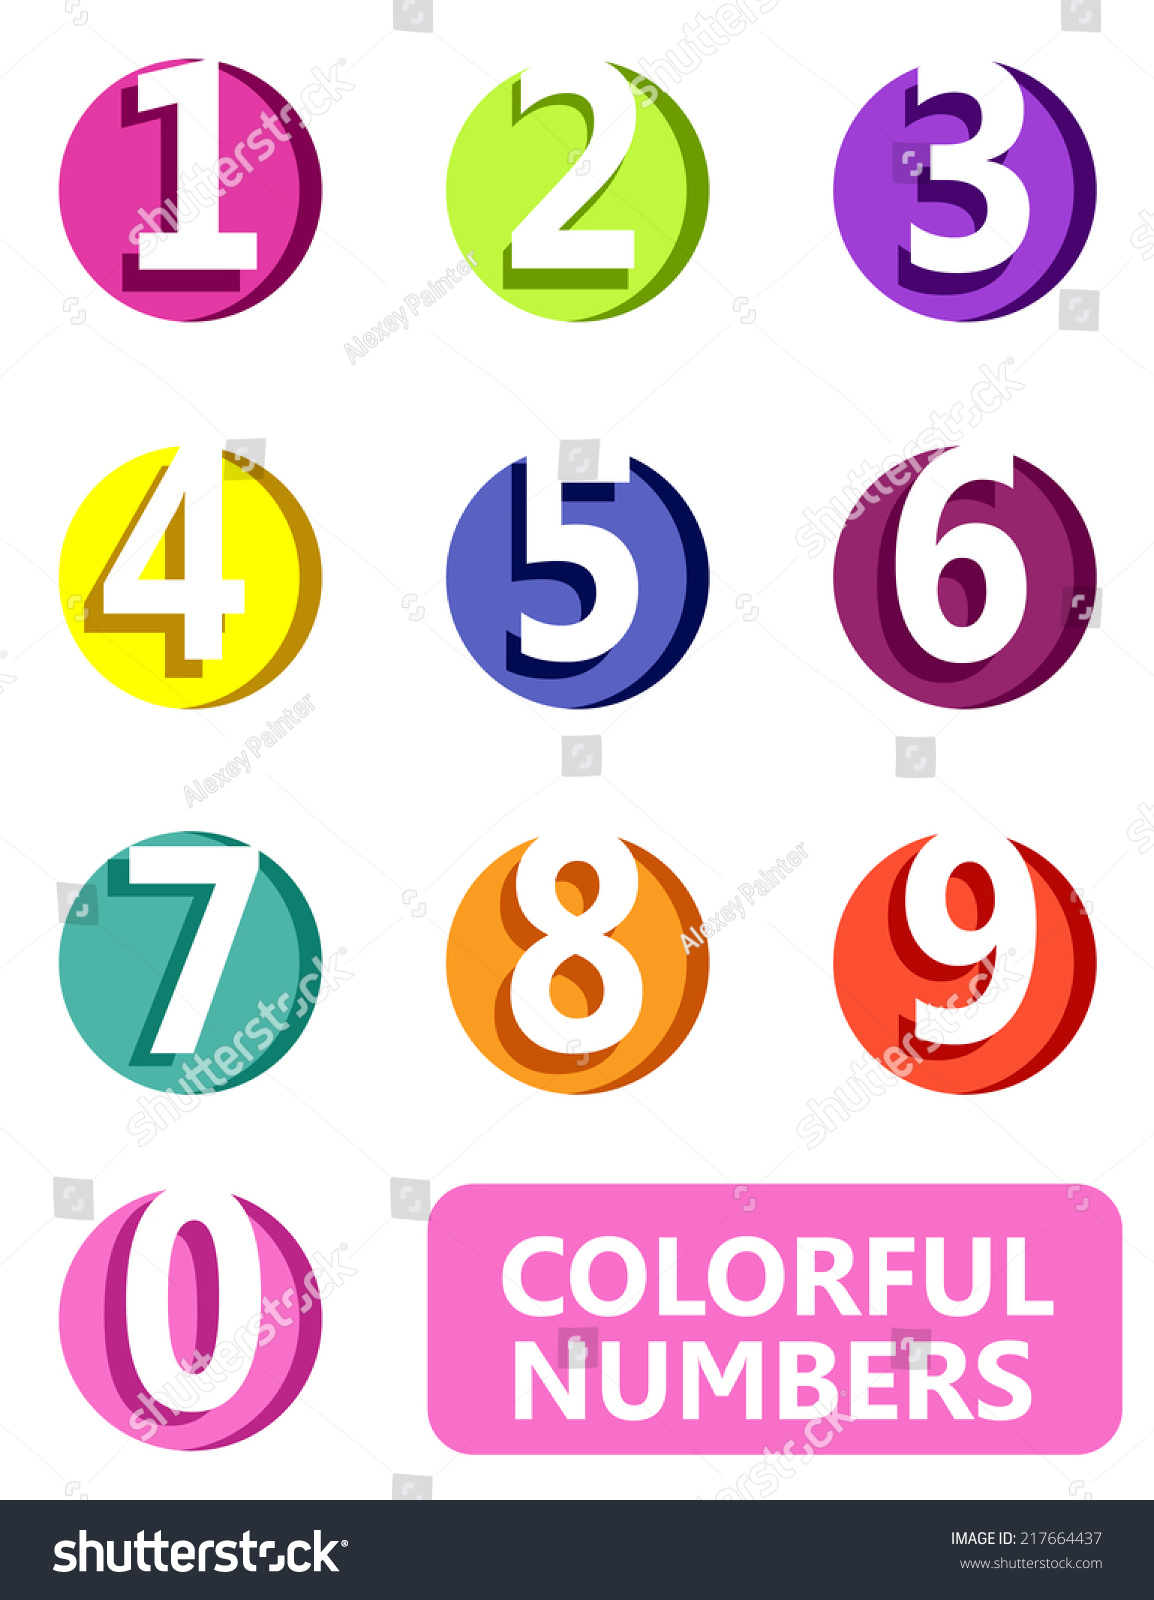 Numbers Colorful Design Over White Background Stock Vector 217664437 ...